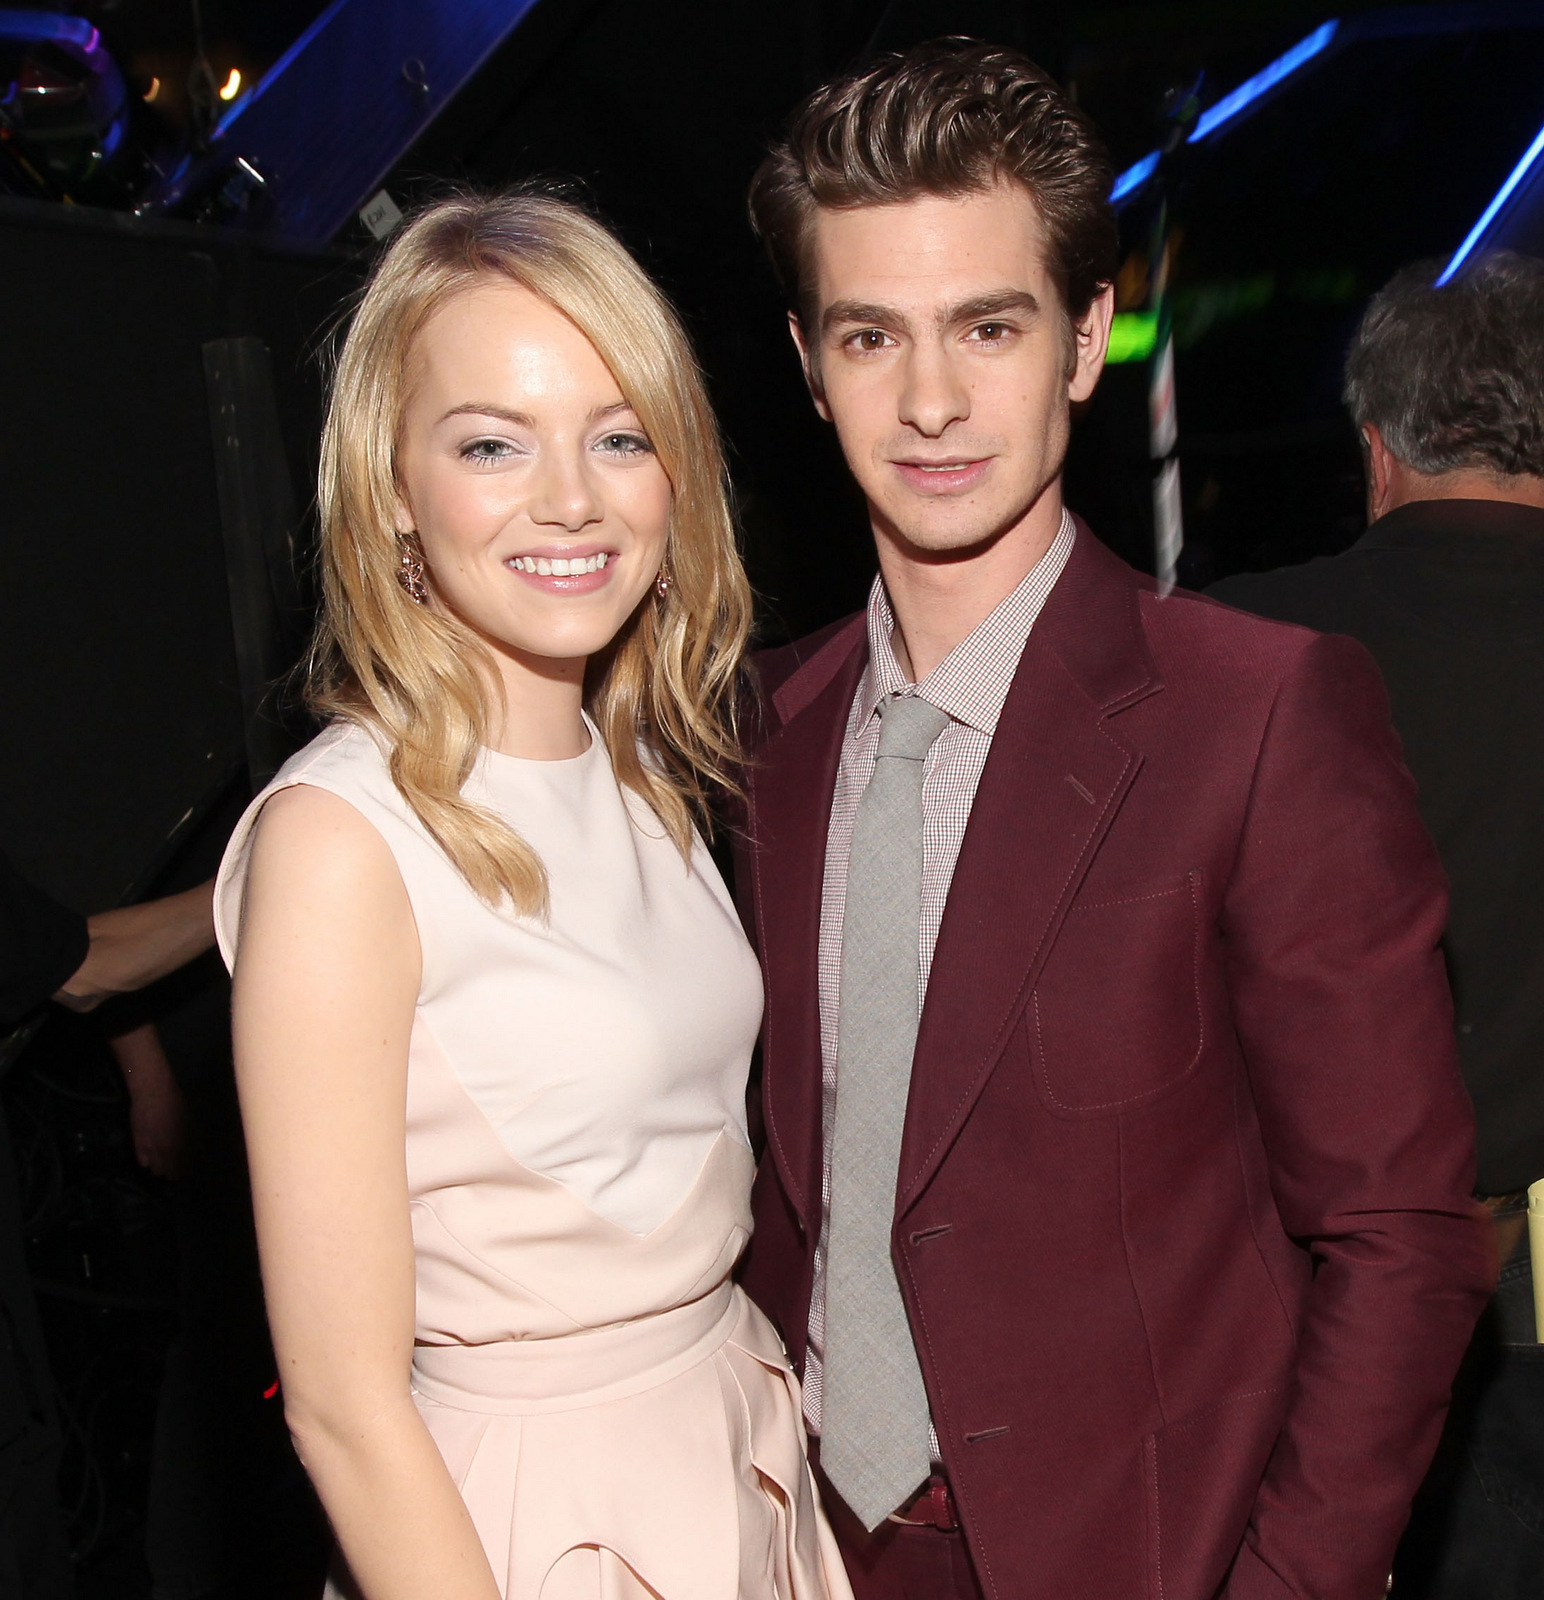 <p>Like so many people, <a href="https://www.wonderwall.com/celebrity/profiles/overview/andrew-garfield-1331.article">Andrew Garfield</a> and <a href="https://www.wonderwall.com/celebrity/profiles/overview/emma-stone-1299.article">Emma Stone</a> met at work. Back in 2012 while promoting their movie, "The Amazing Spider-Man," Andrew revealed to Teen Vogue how he met Emma during the casting process. "It was like I woke up when she came in. She was the last person to screen test, and I was so bored of it by then that I was mucking about," he said. "And then she came in, and it was like diving into whitewater rapids and having no desire to hang on to the side. Throughout shooting, it was wild and exciting. I couldn't help but try to stay with her, keep pace with her, and not let her get away." They split in 2015.</p>